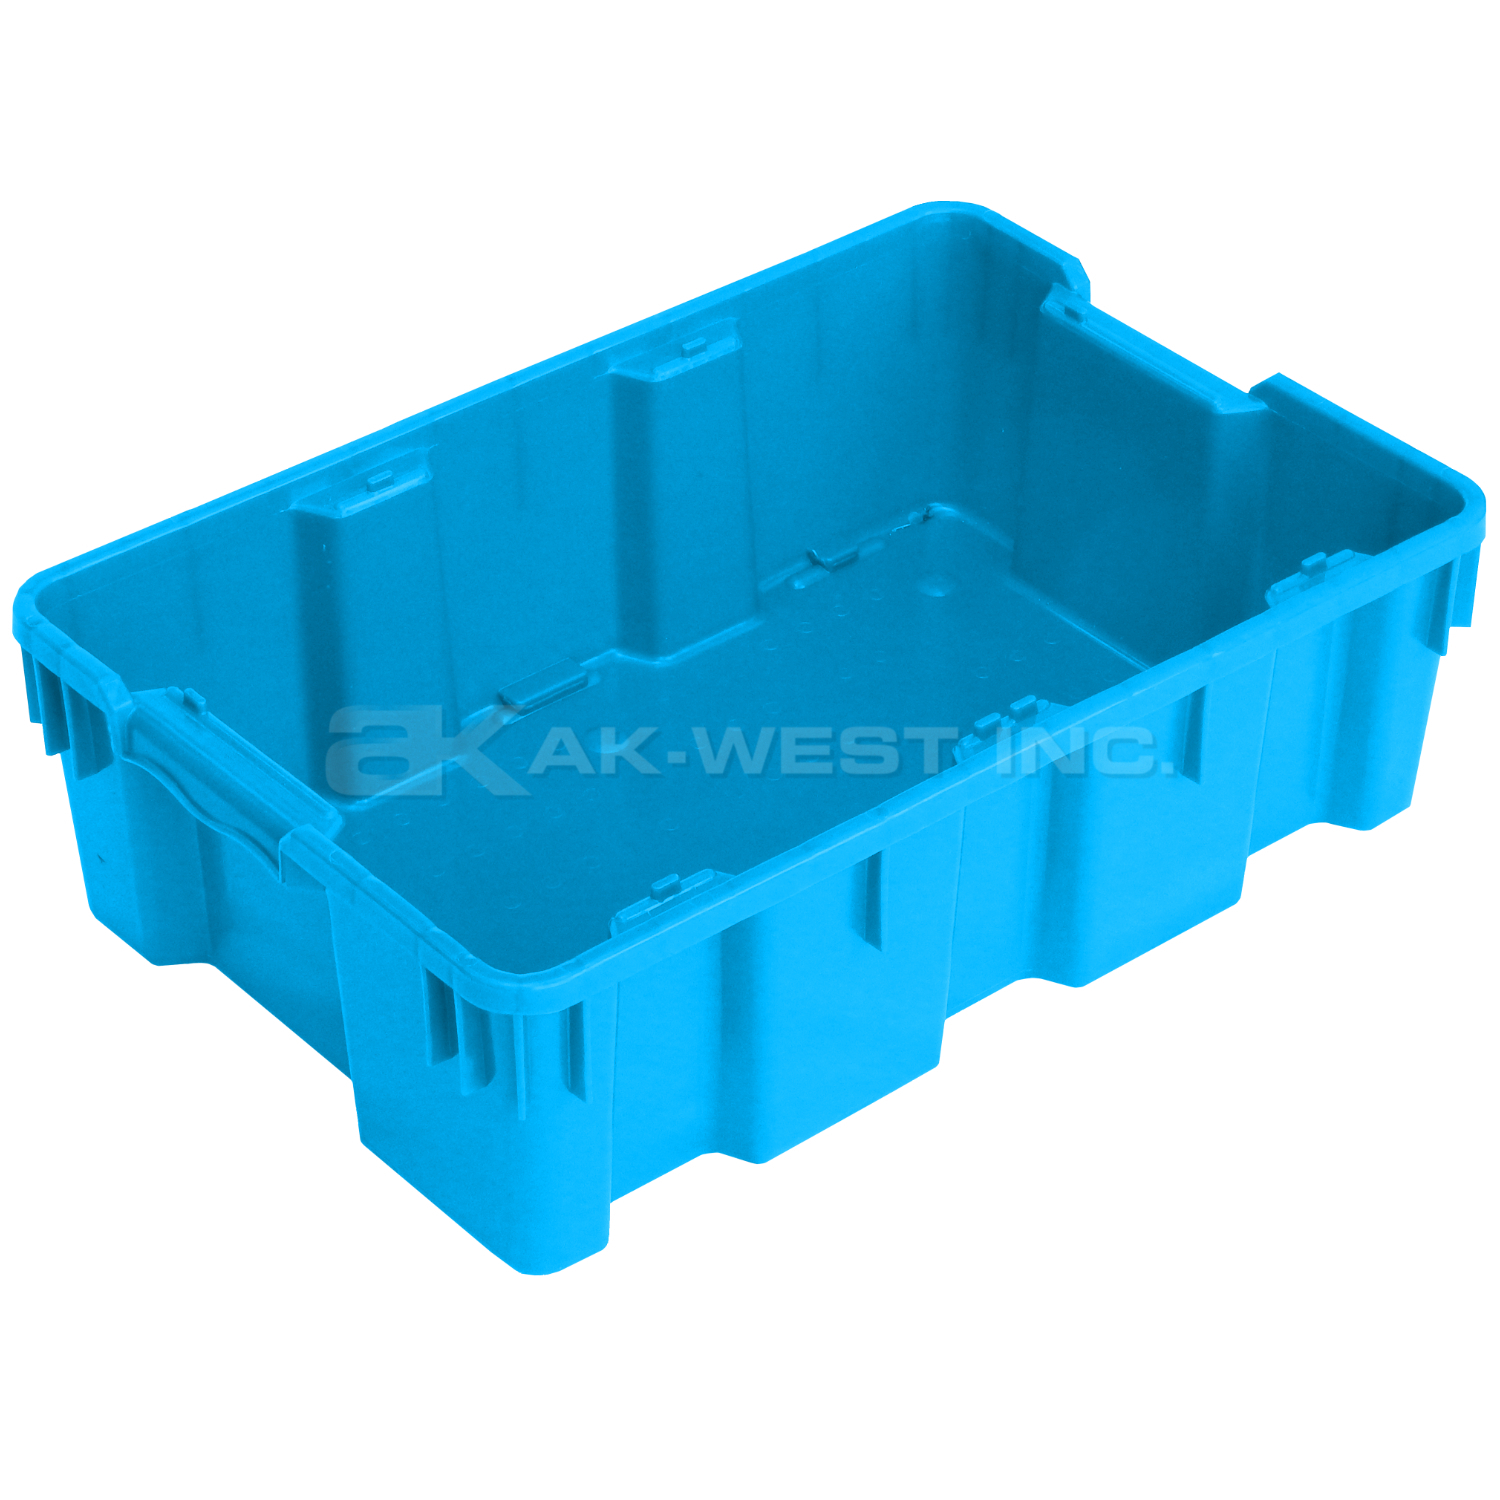 Lt. Blue, 24"L x 16"W x 7"H Stack and Nest Container w/ Solid Sides and Base